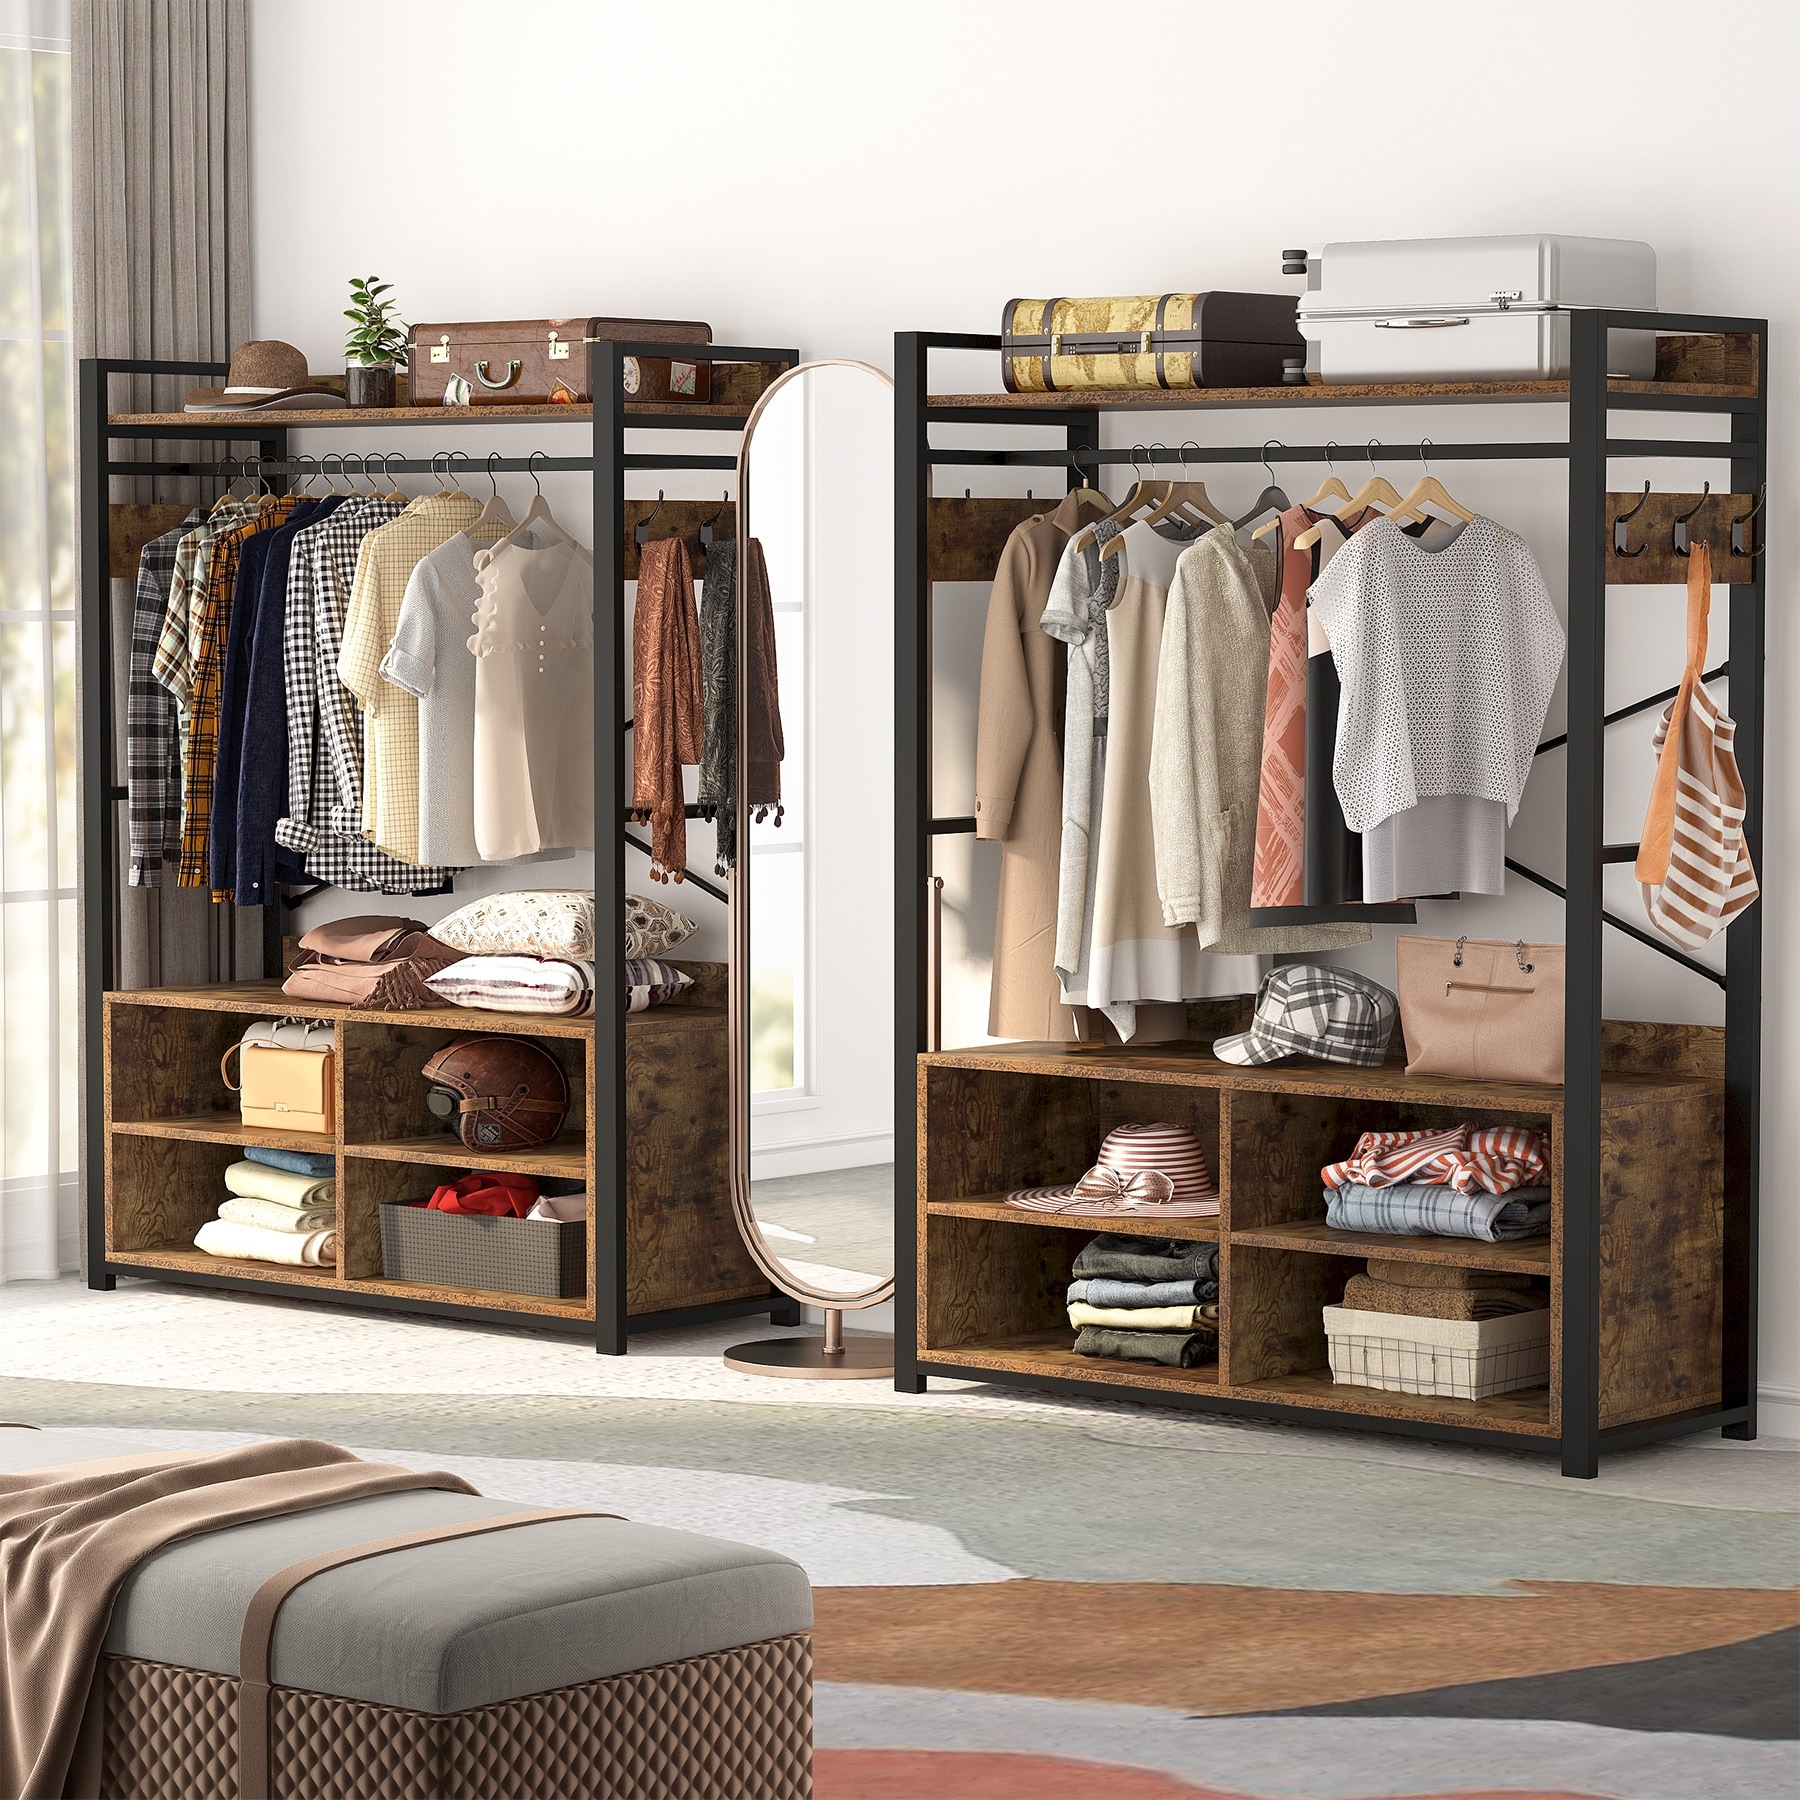 https://ak1.ostkcdn.com/images/products/is/images/direct/87d1d67c1babbcb1f74b1cff7415670530ac2692/Metal-Wood-Free-standing-Closet-Clothing-Rack-Closet-Organizer-System-with-Shelves-Clothes-Garment-Rack-Shelving-for-Bedroom.jpg